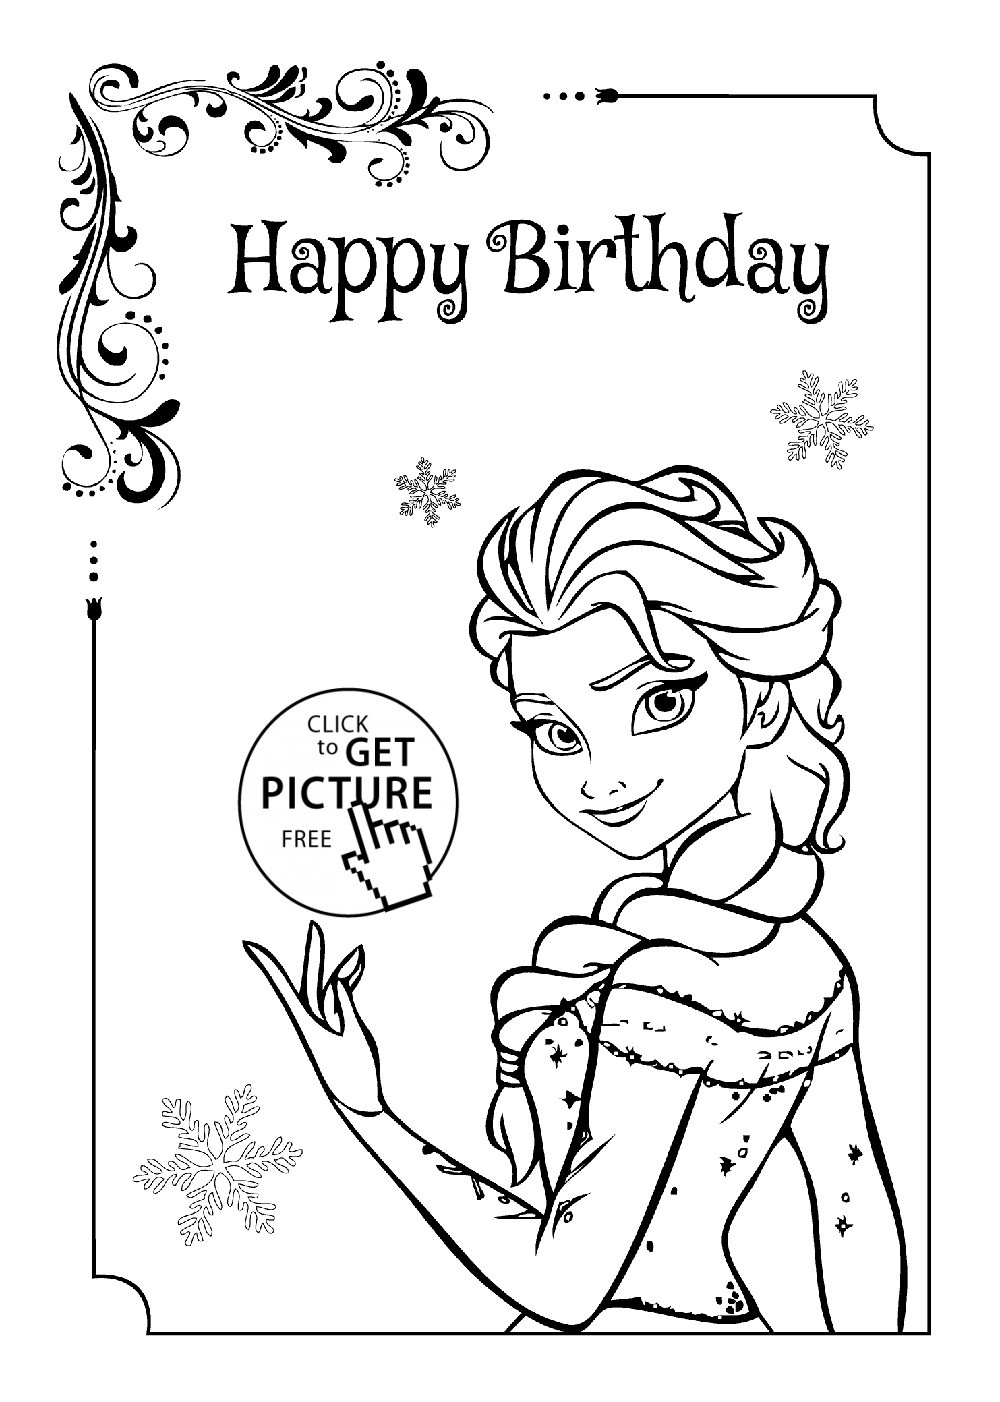 Personalized Coloring Pages Coloring Ideas 54 Remarkable Personalized Coloring Sheets Coloring